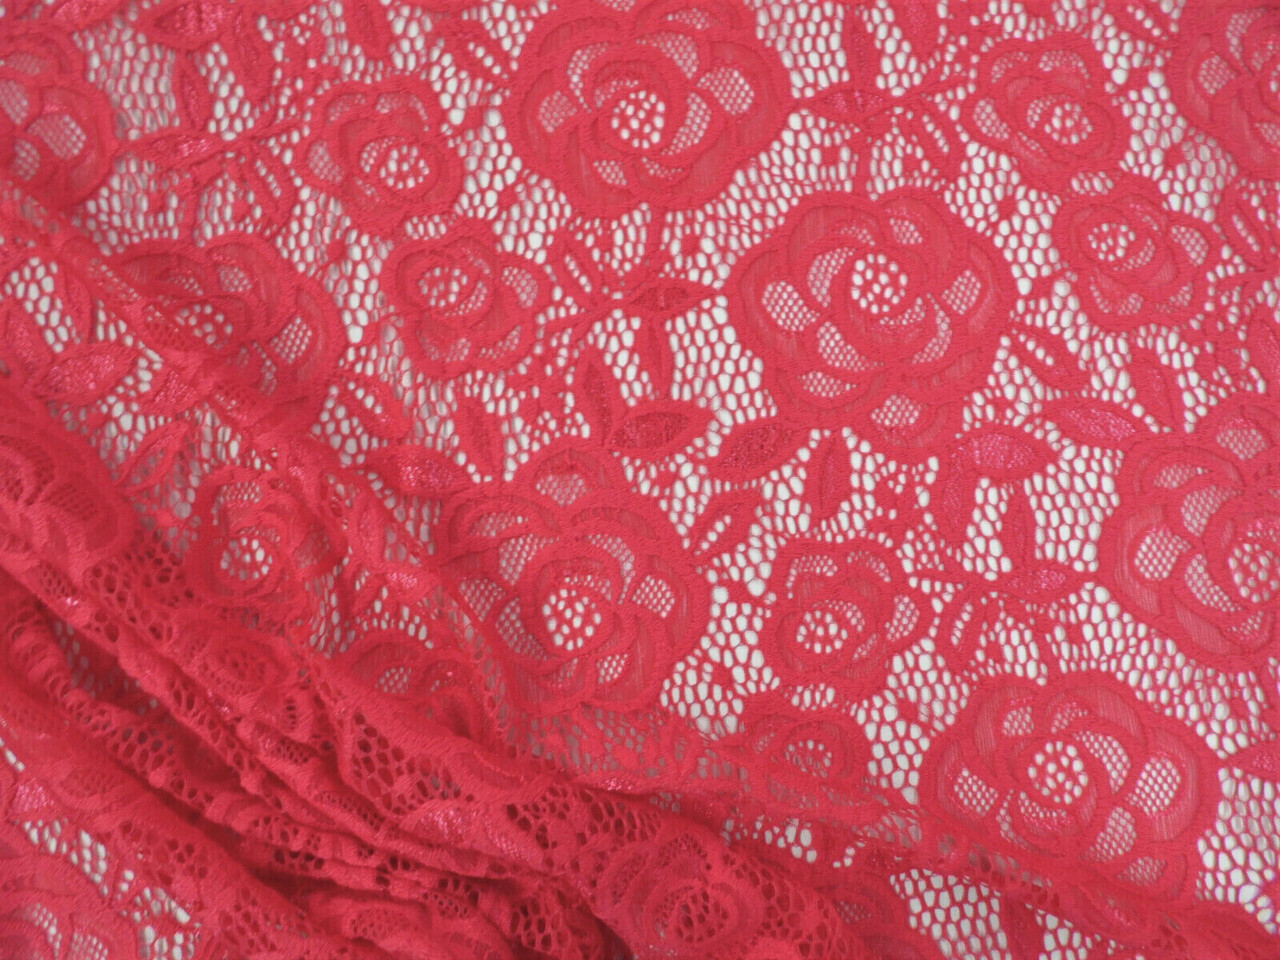 Embroidered Stretch Lace Apparel Fabric Sheer Metallic Rose Floral Red QQ24